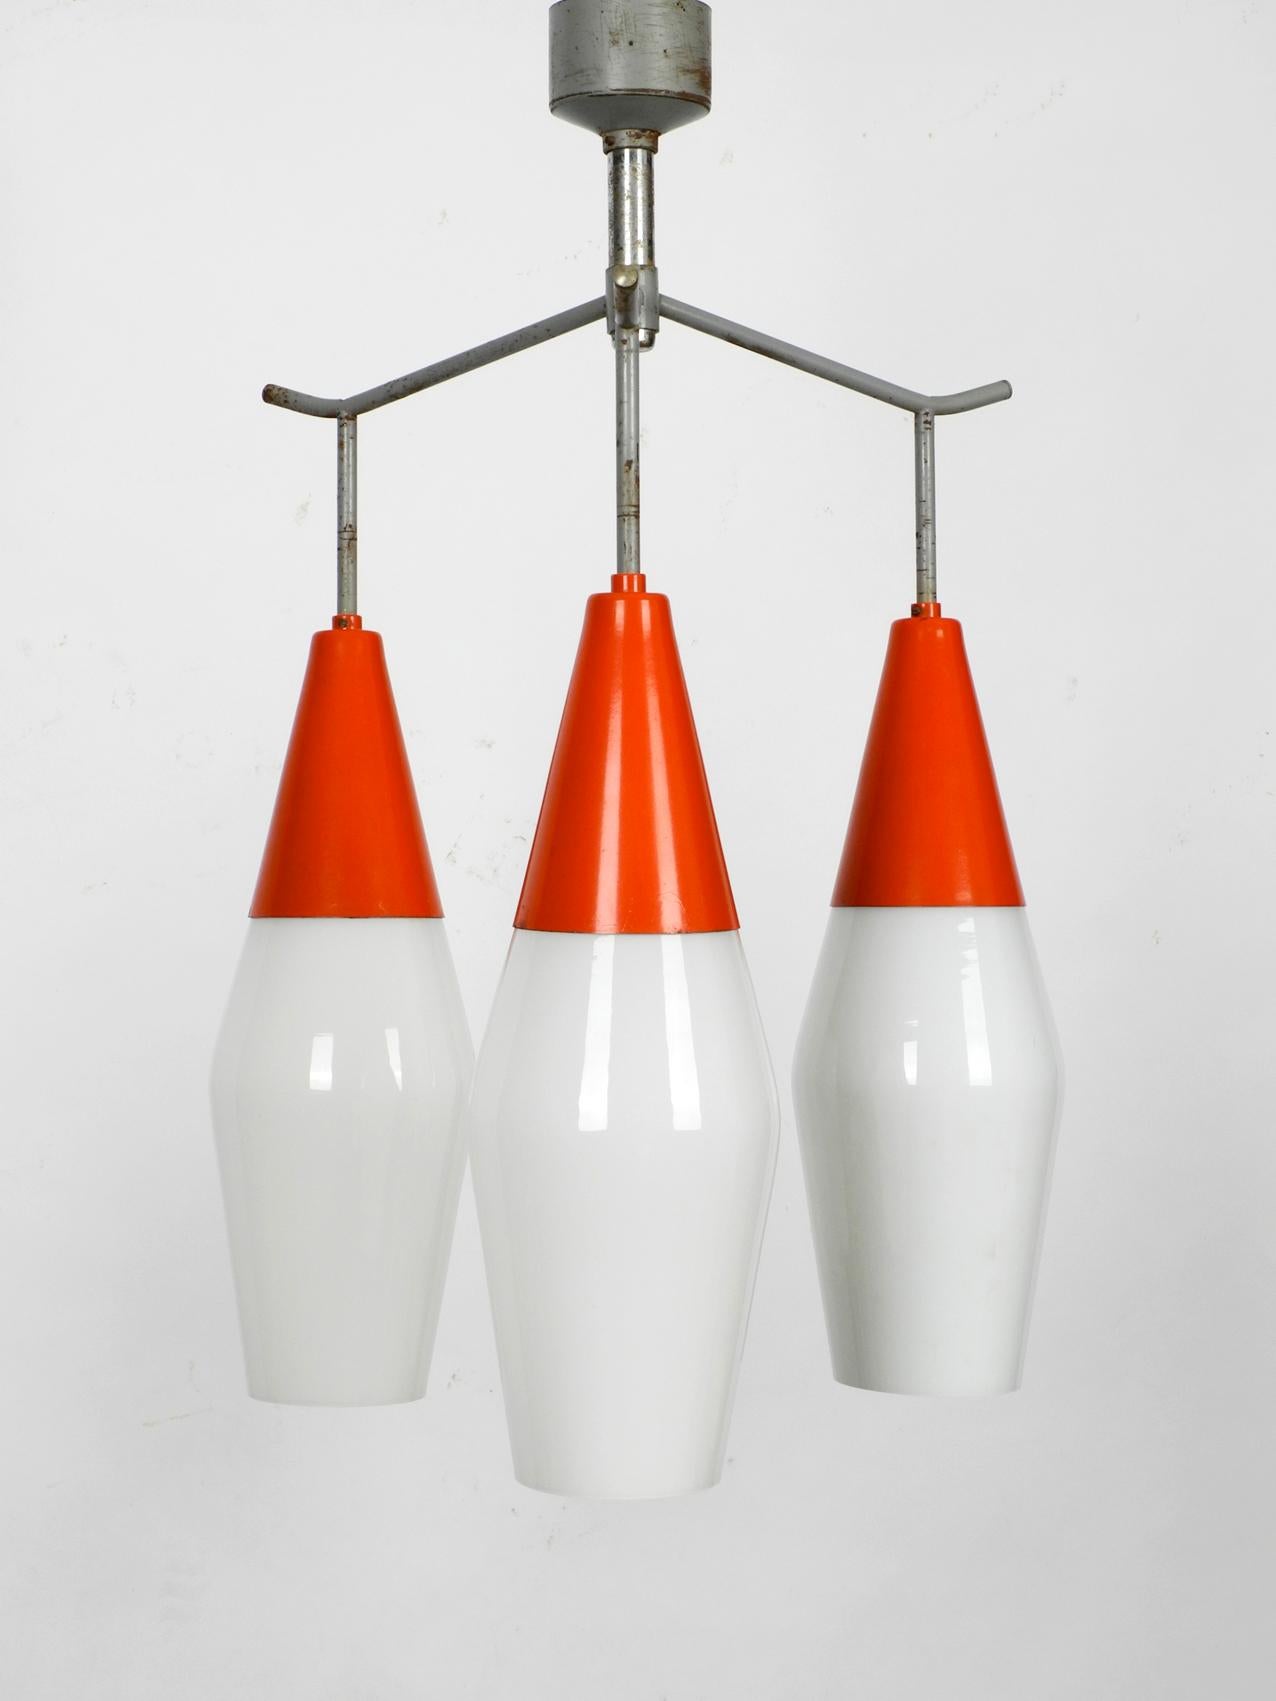 Midcentury Industrial Metal and Glass Ceiling Light by Josef Hurka for Napako In Good Condition For Sale In München, DE